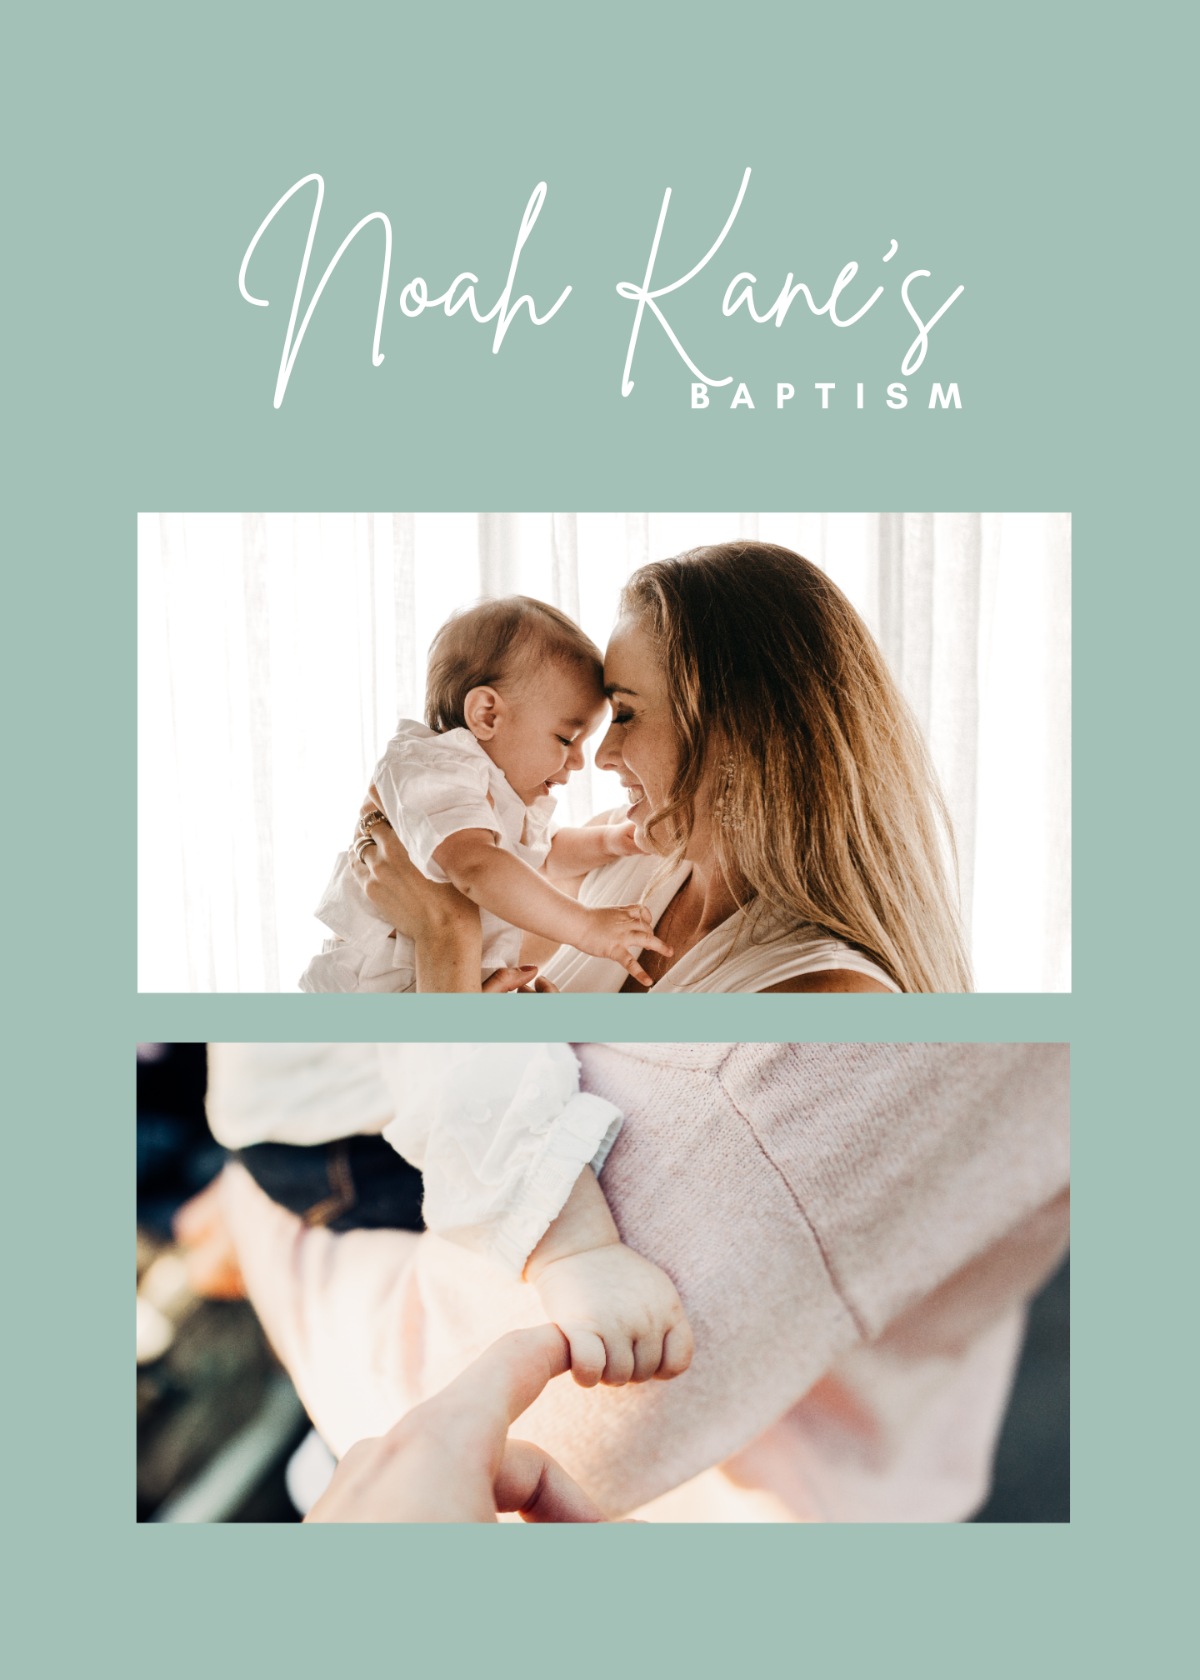 Free Baptism Photo Booth Template